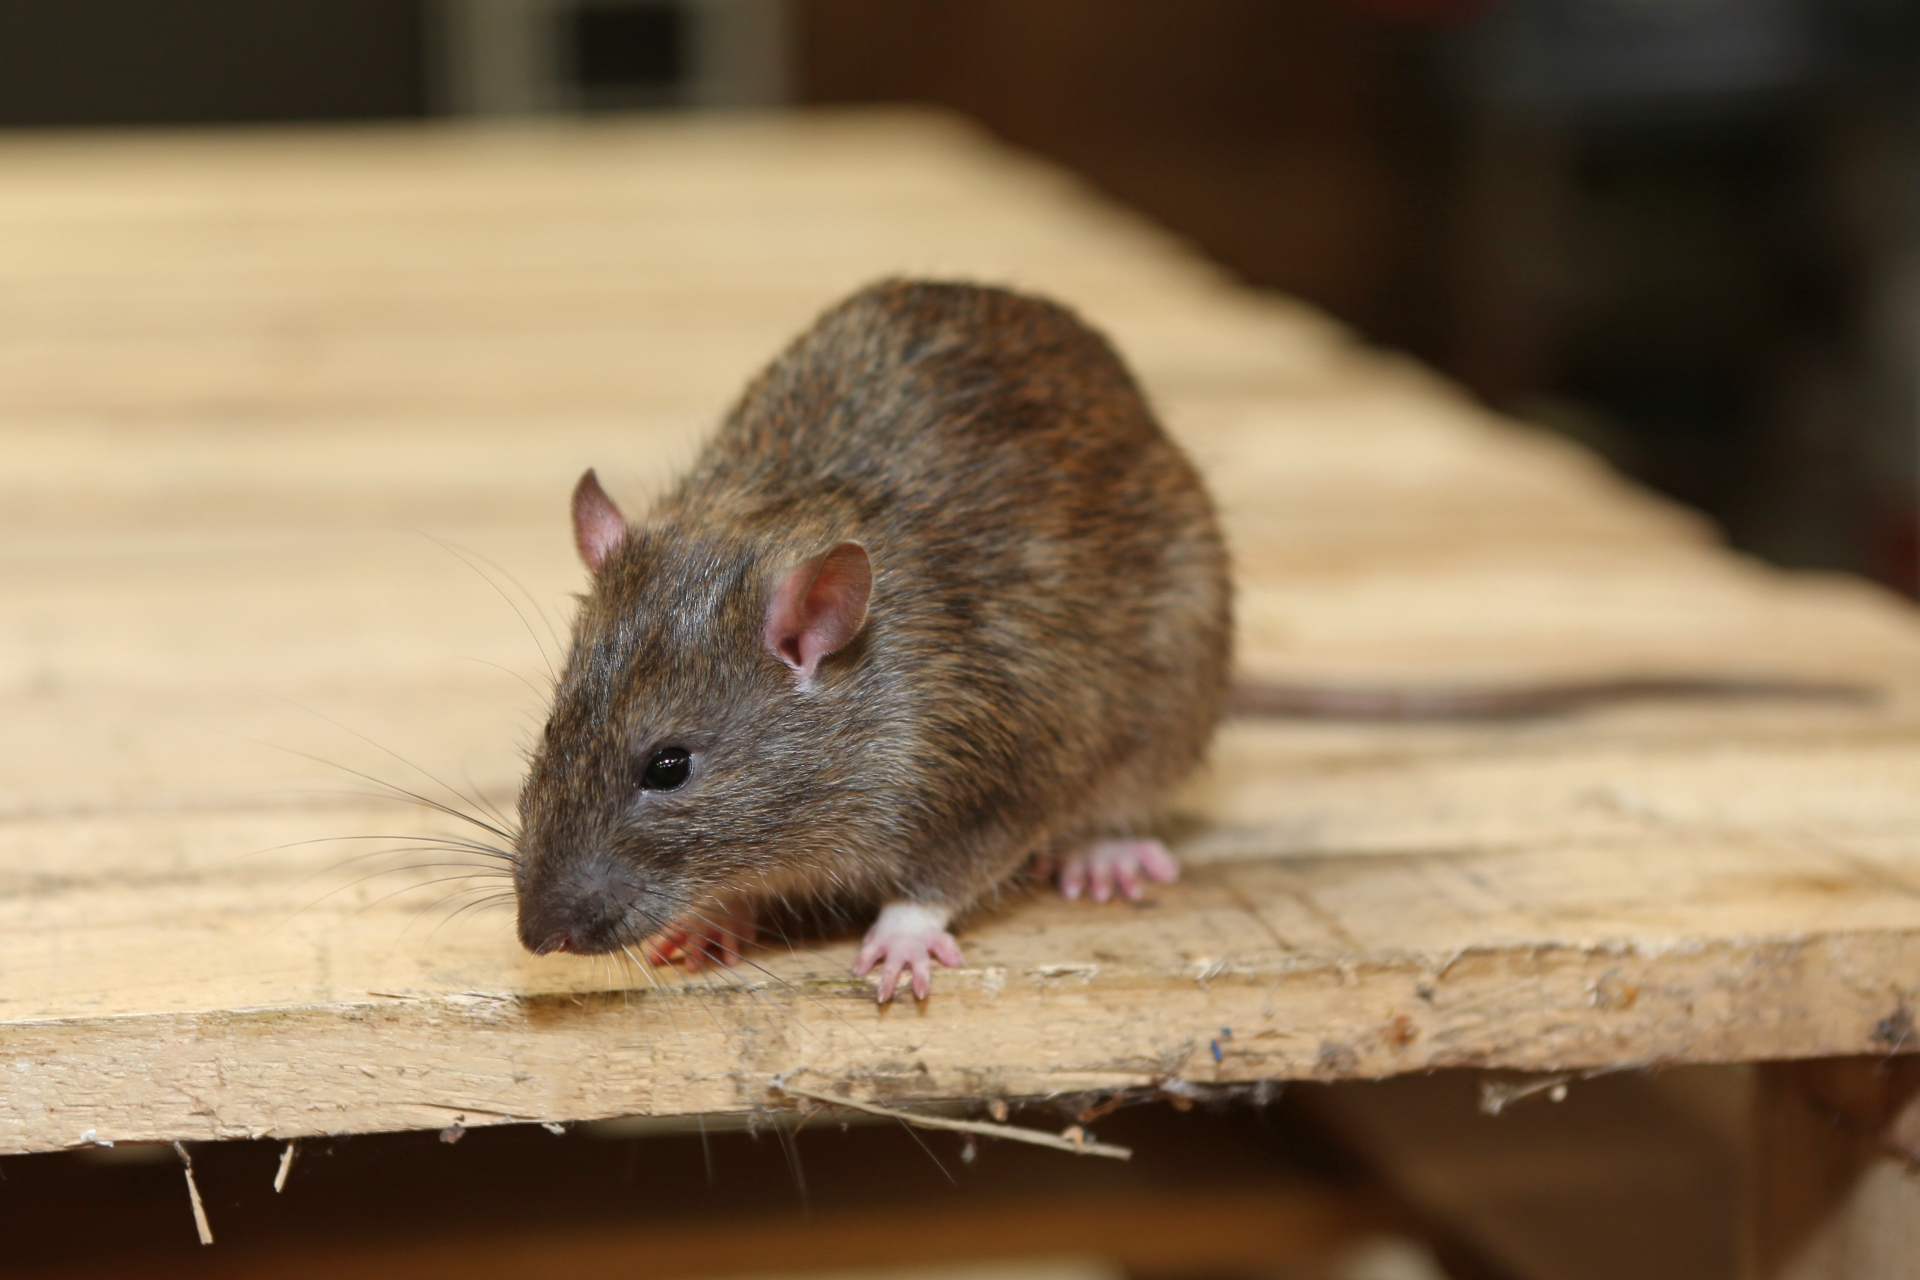 Rat extermination, Pest Control in Kilburn, Queens Park, West Hampstead, NW6. Call Now 020 8166 9746